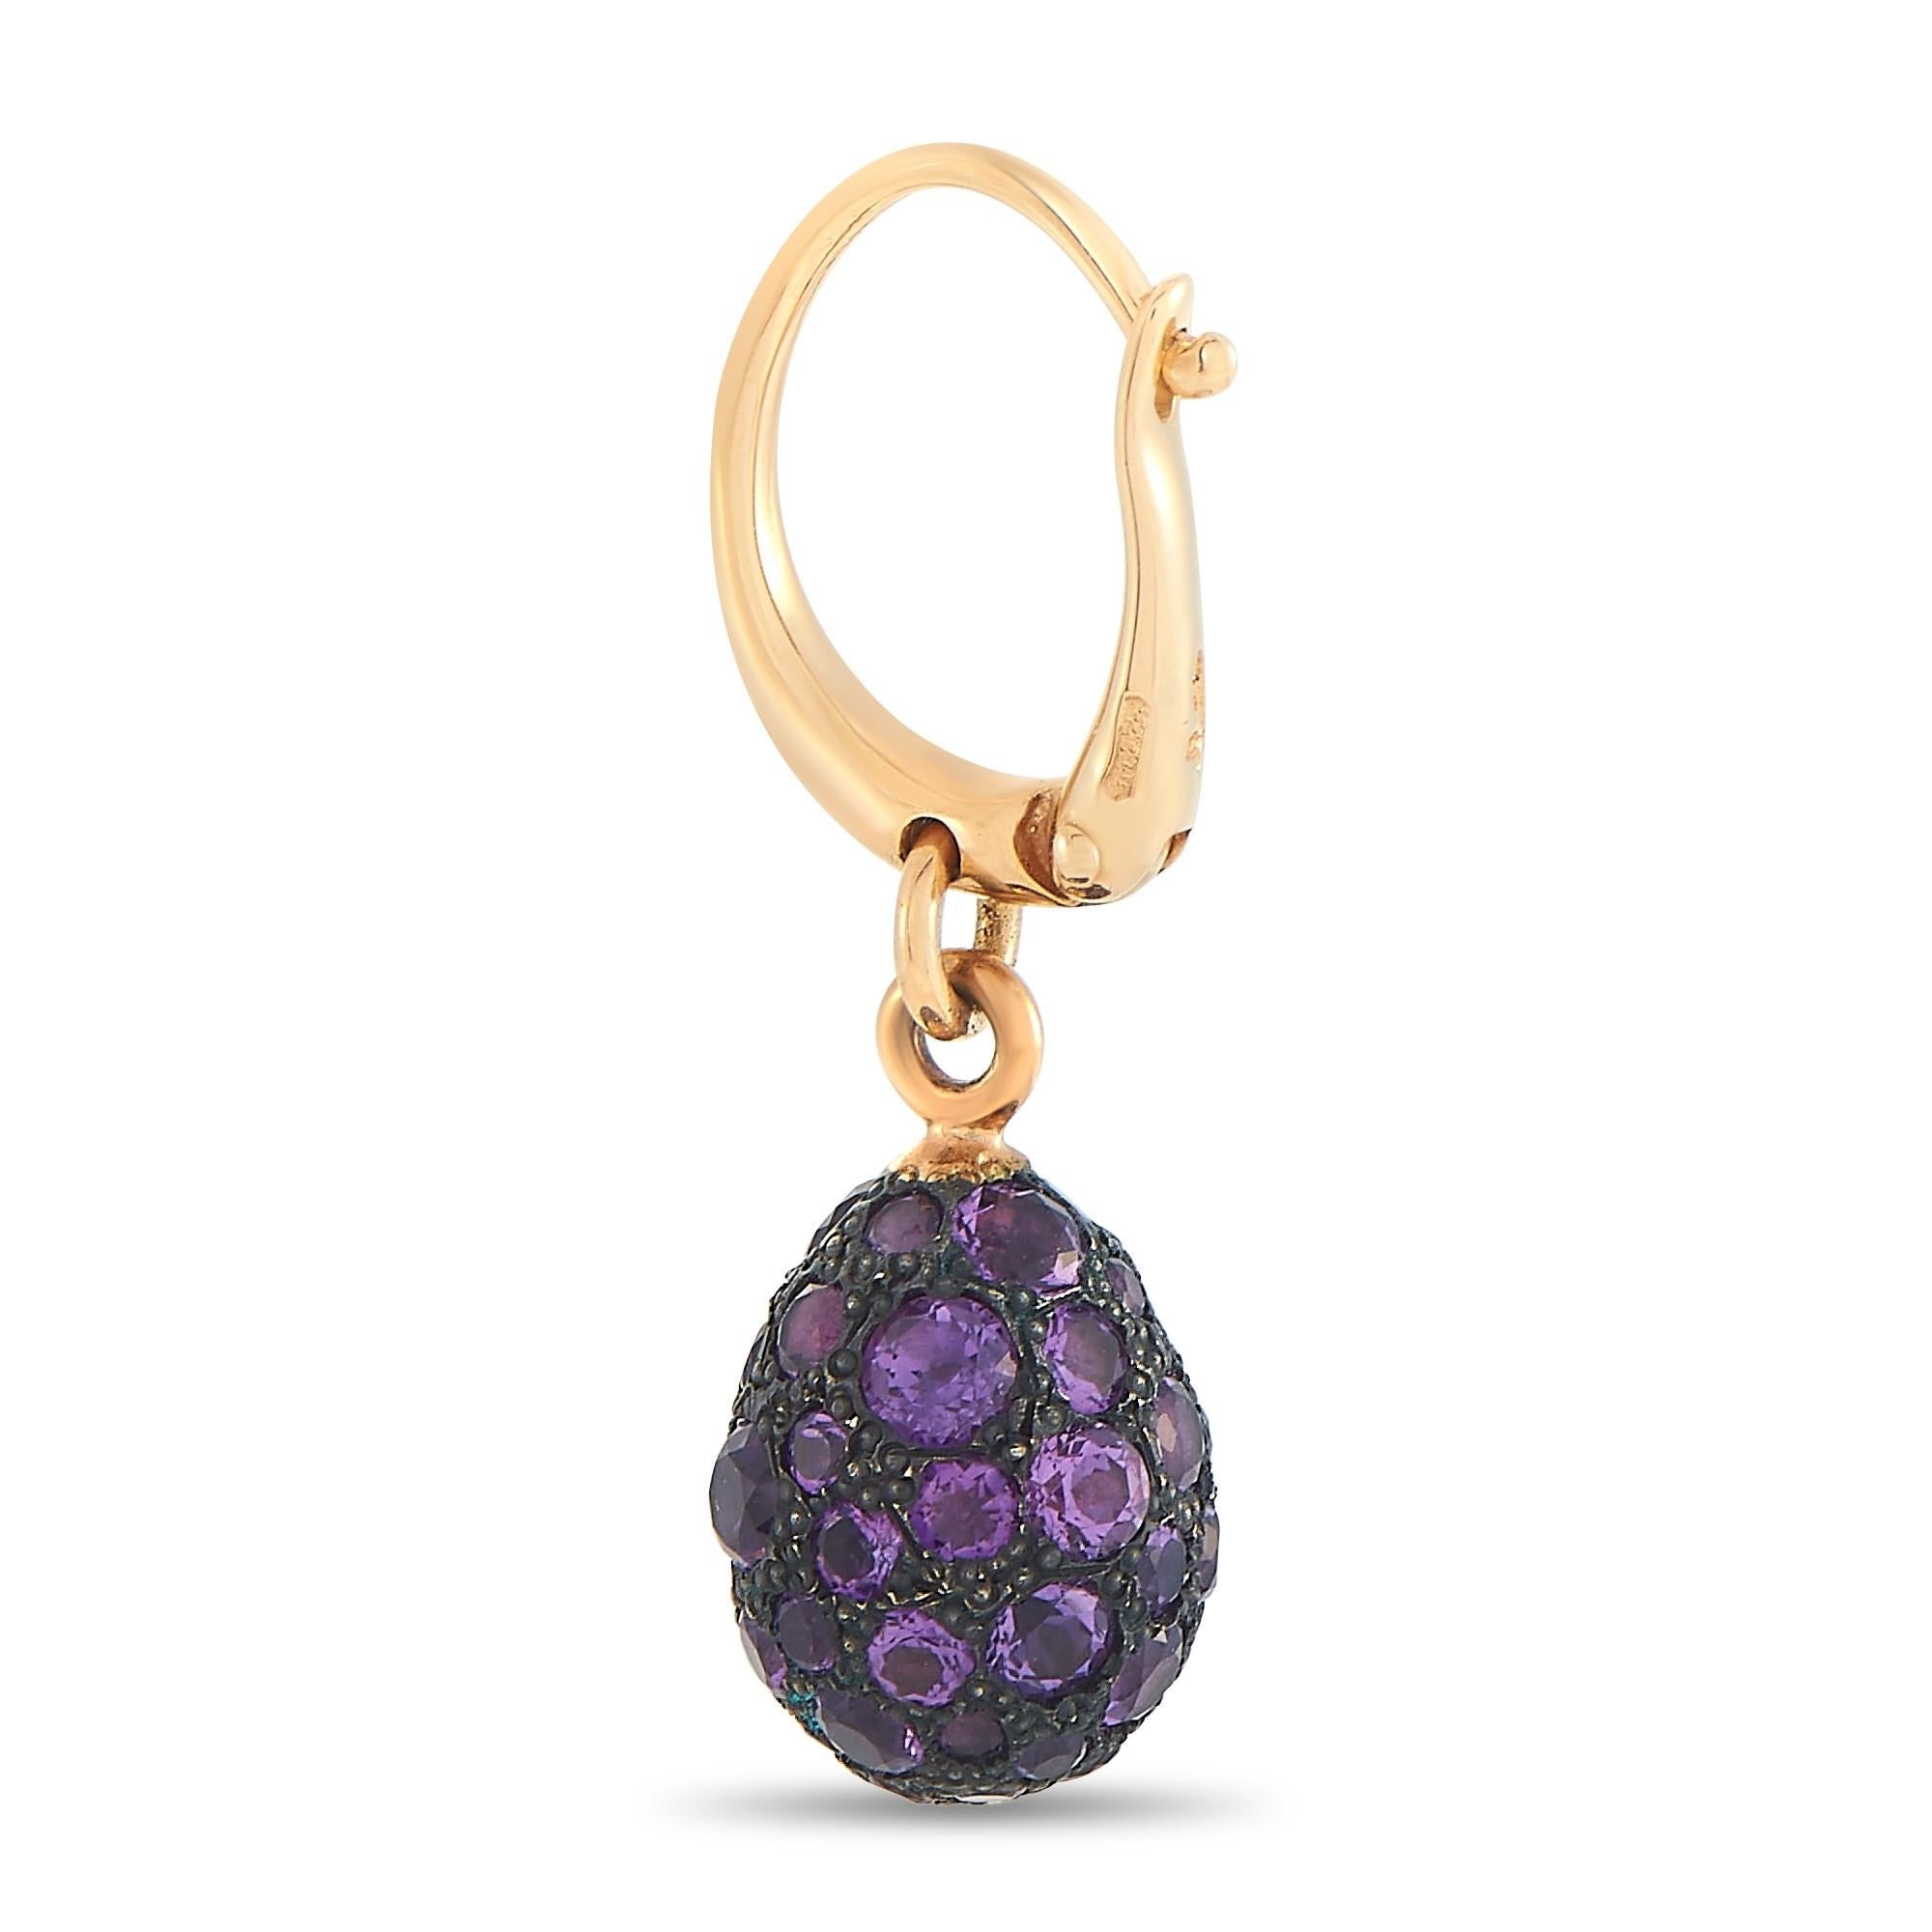 Instantly add interest to any of your looks with the Pomellato 18K Rose Gold Tabou Amethyst Drop Earrings. This pair features faceted purple amethyst stones in different shapes and sizes set in burnished silver and 18K rose gold. The earrings are